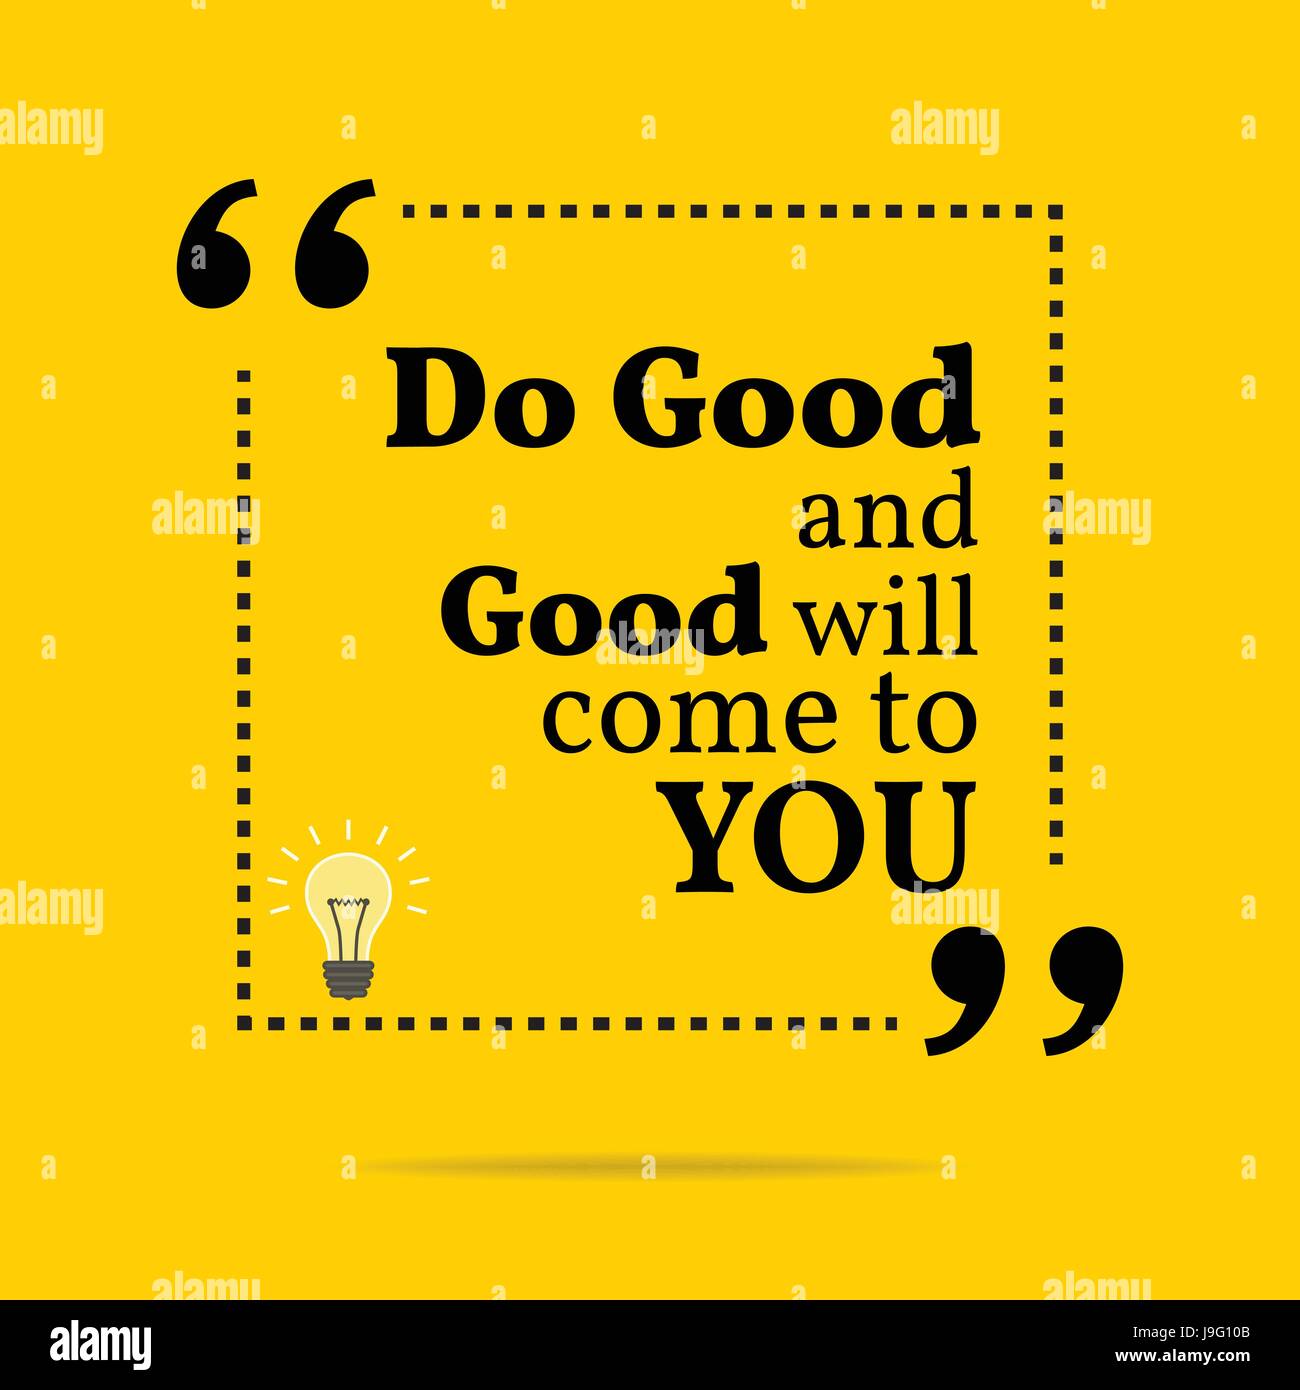 Inspirational motivational quote. Do good and good will come to you. Simple trendy design. Stock Vector